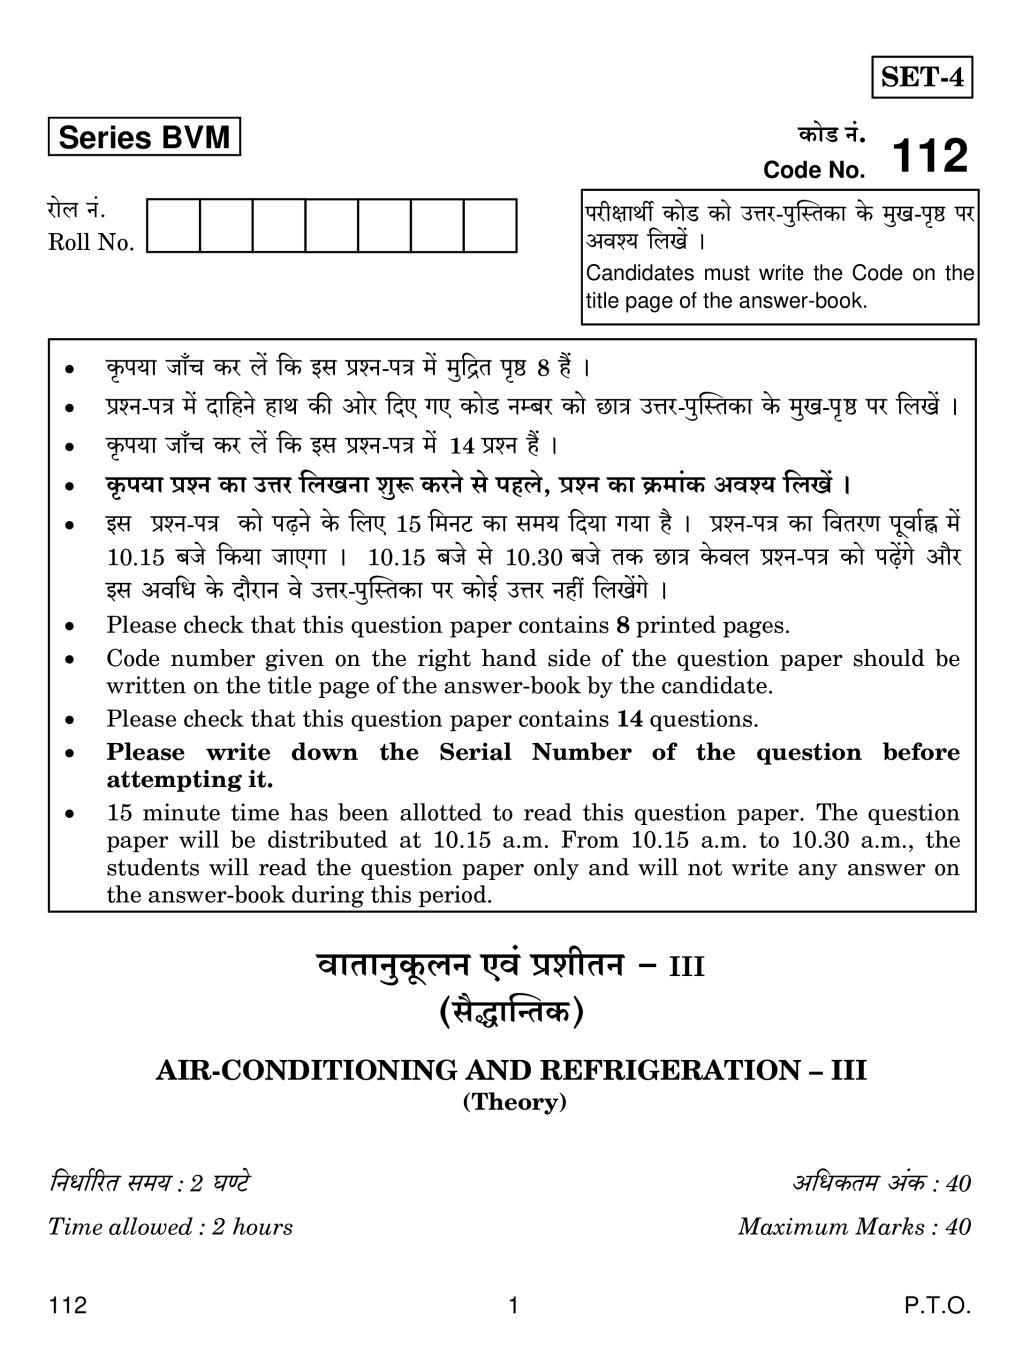 CBSE Class 12 Air-Conditioning and Refrigeration III Question Paper 2019 - Page 1